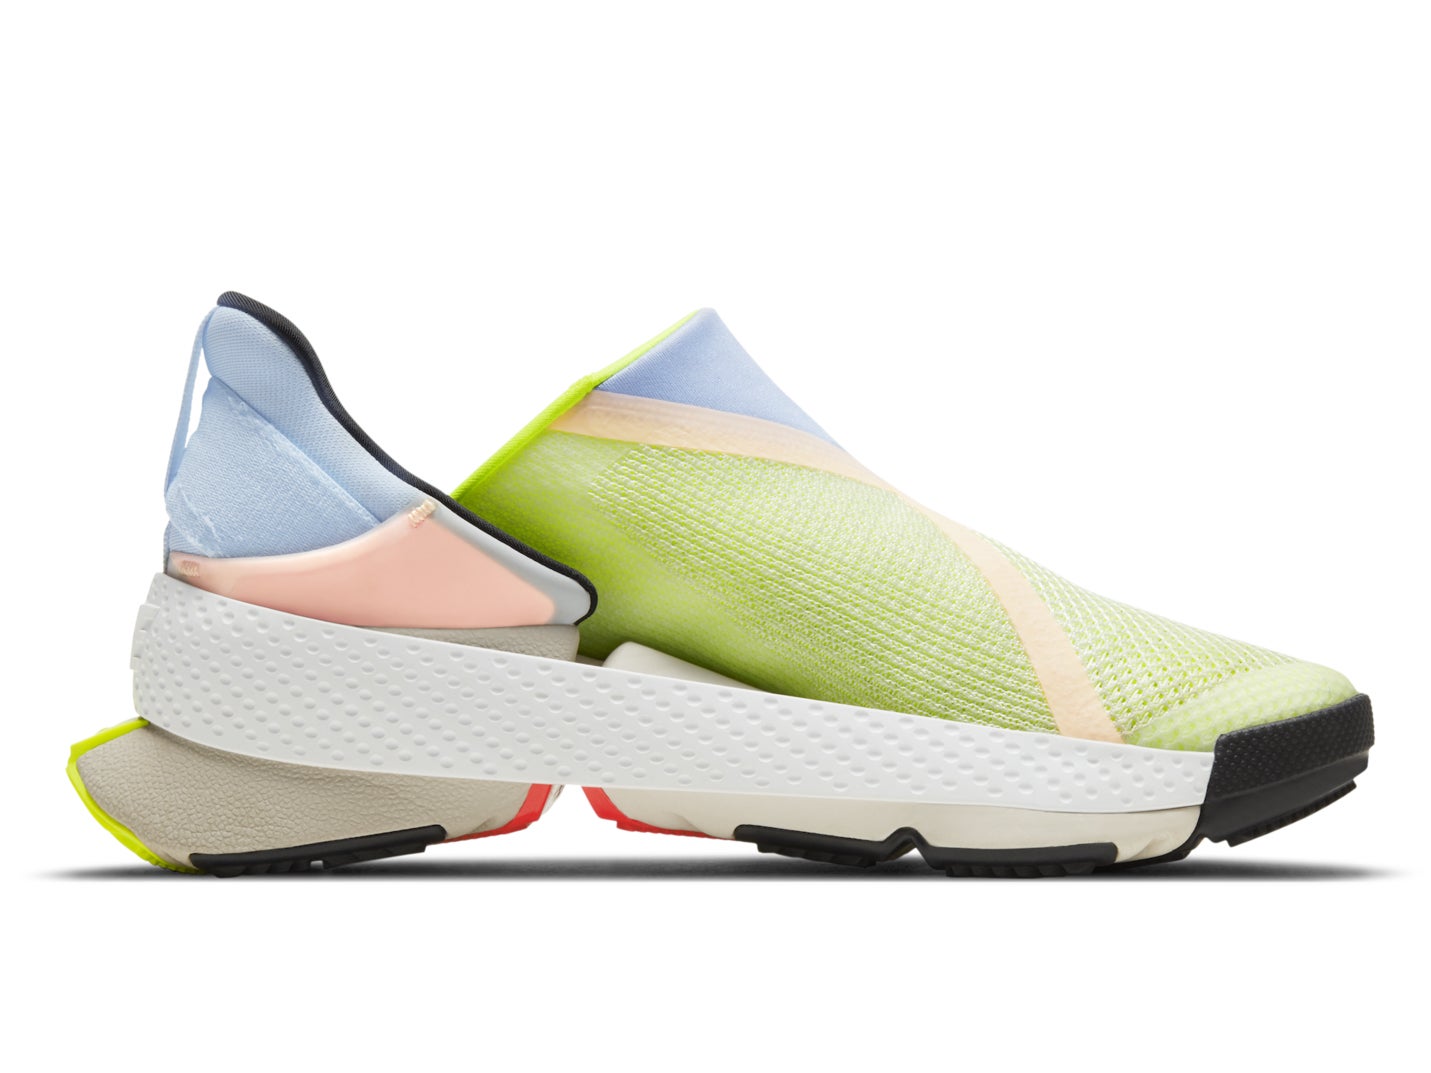 Nike's lace-free sneakers offer a 